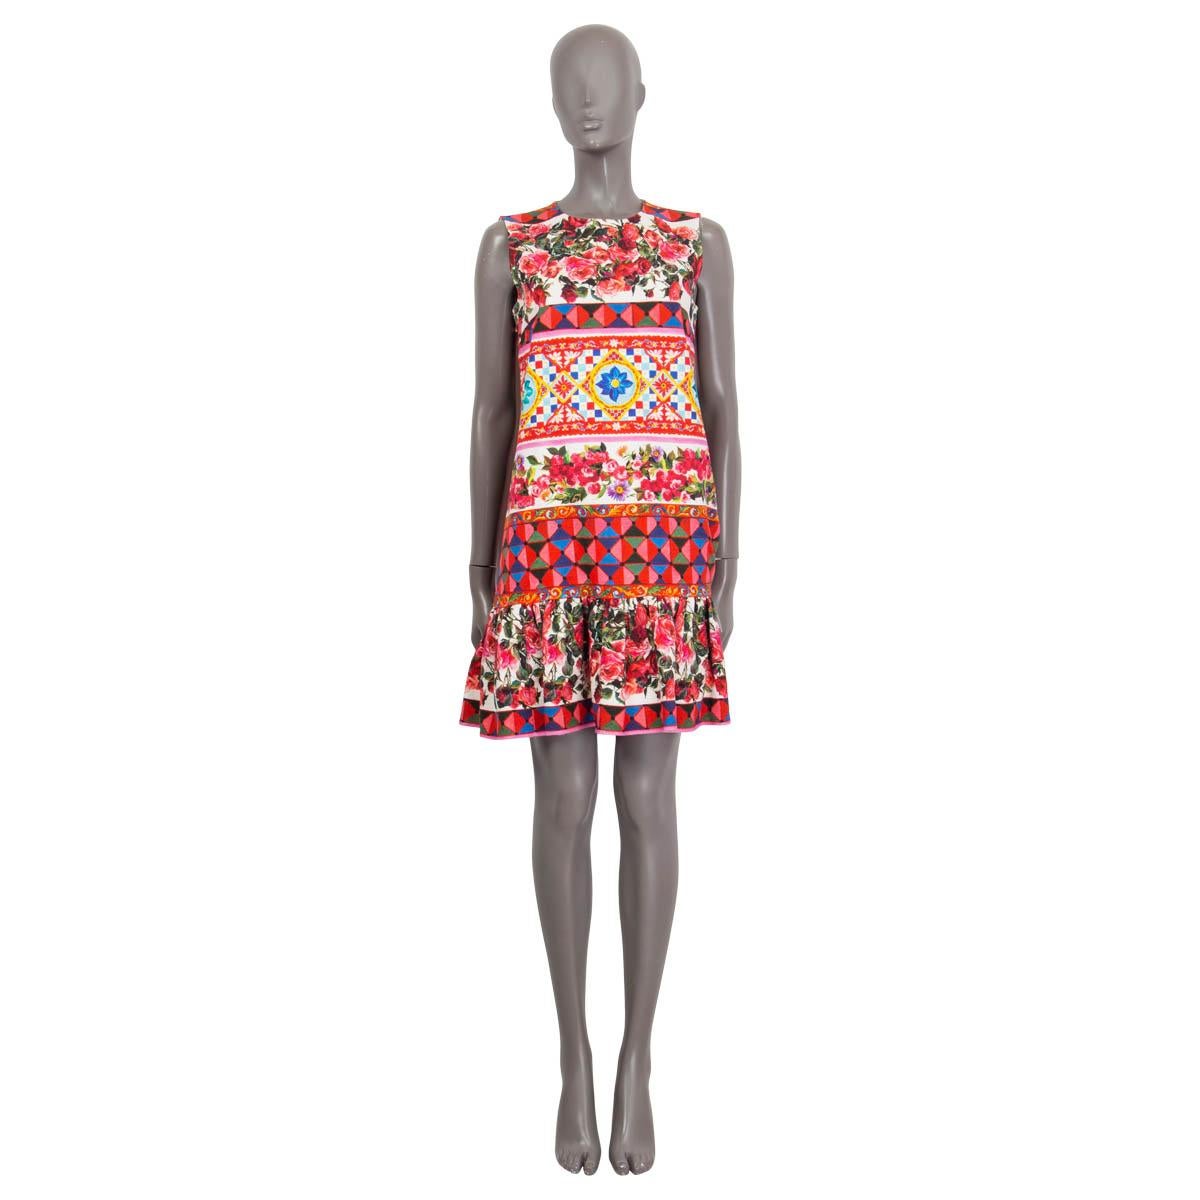 100% authentic Dolce & Gabbana Spring/Summer 2017 sleeveless dress in pink, green, blue, yellow, white and turquoise cotton (99%) and elastane (1%). Has a mambo print featuring maiolica and rose pattern. Features ruffled details at the hemline.